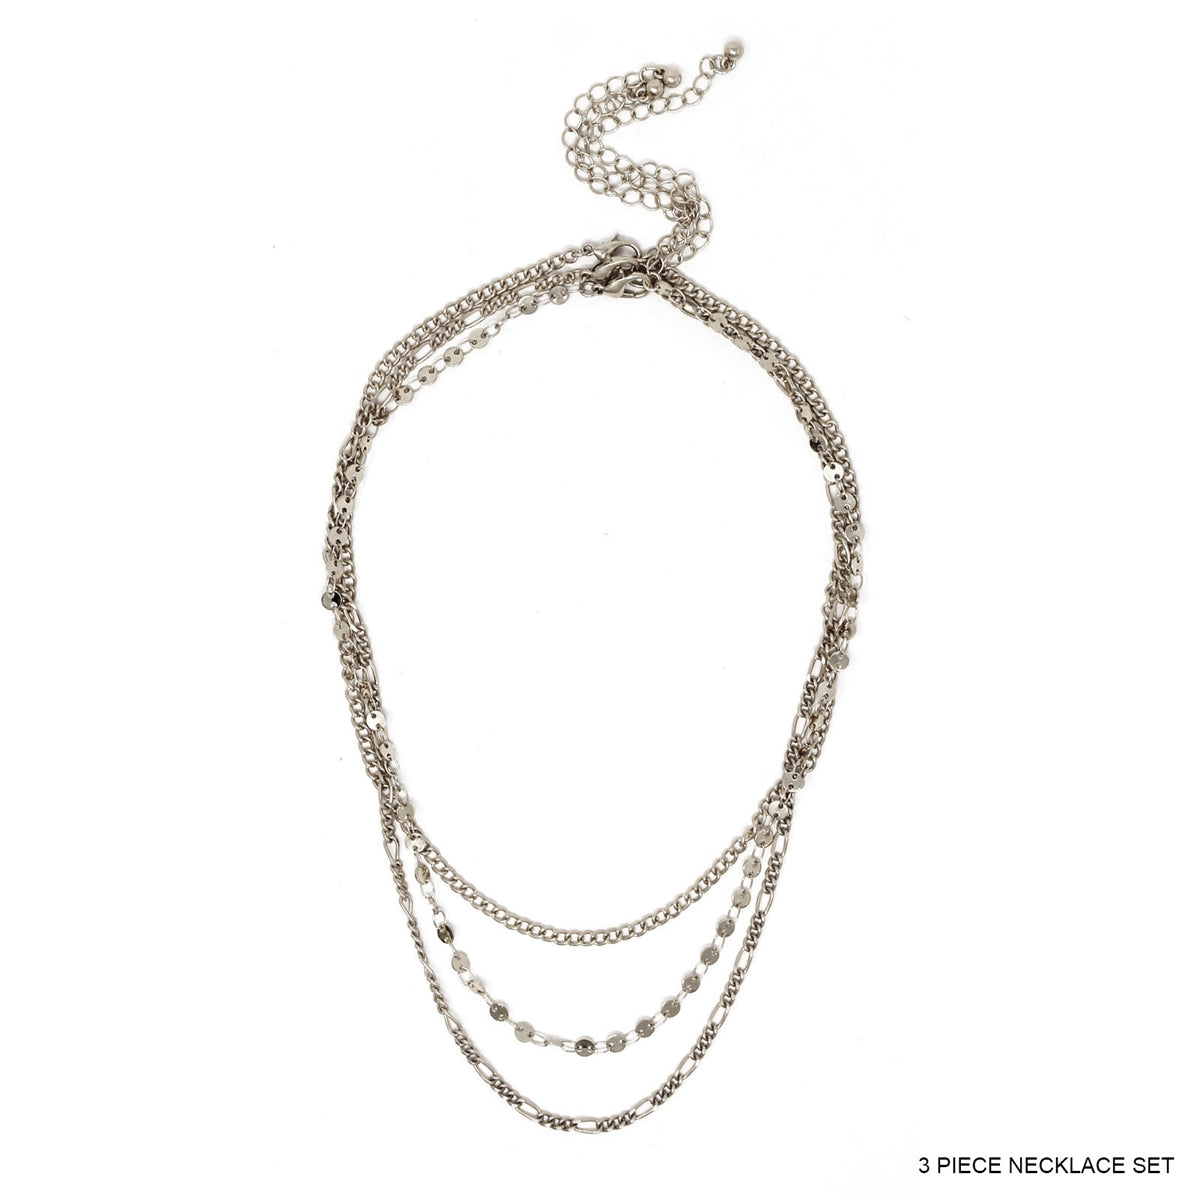 Worn Silver Chain Layered Necklace